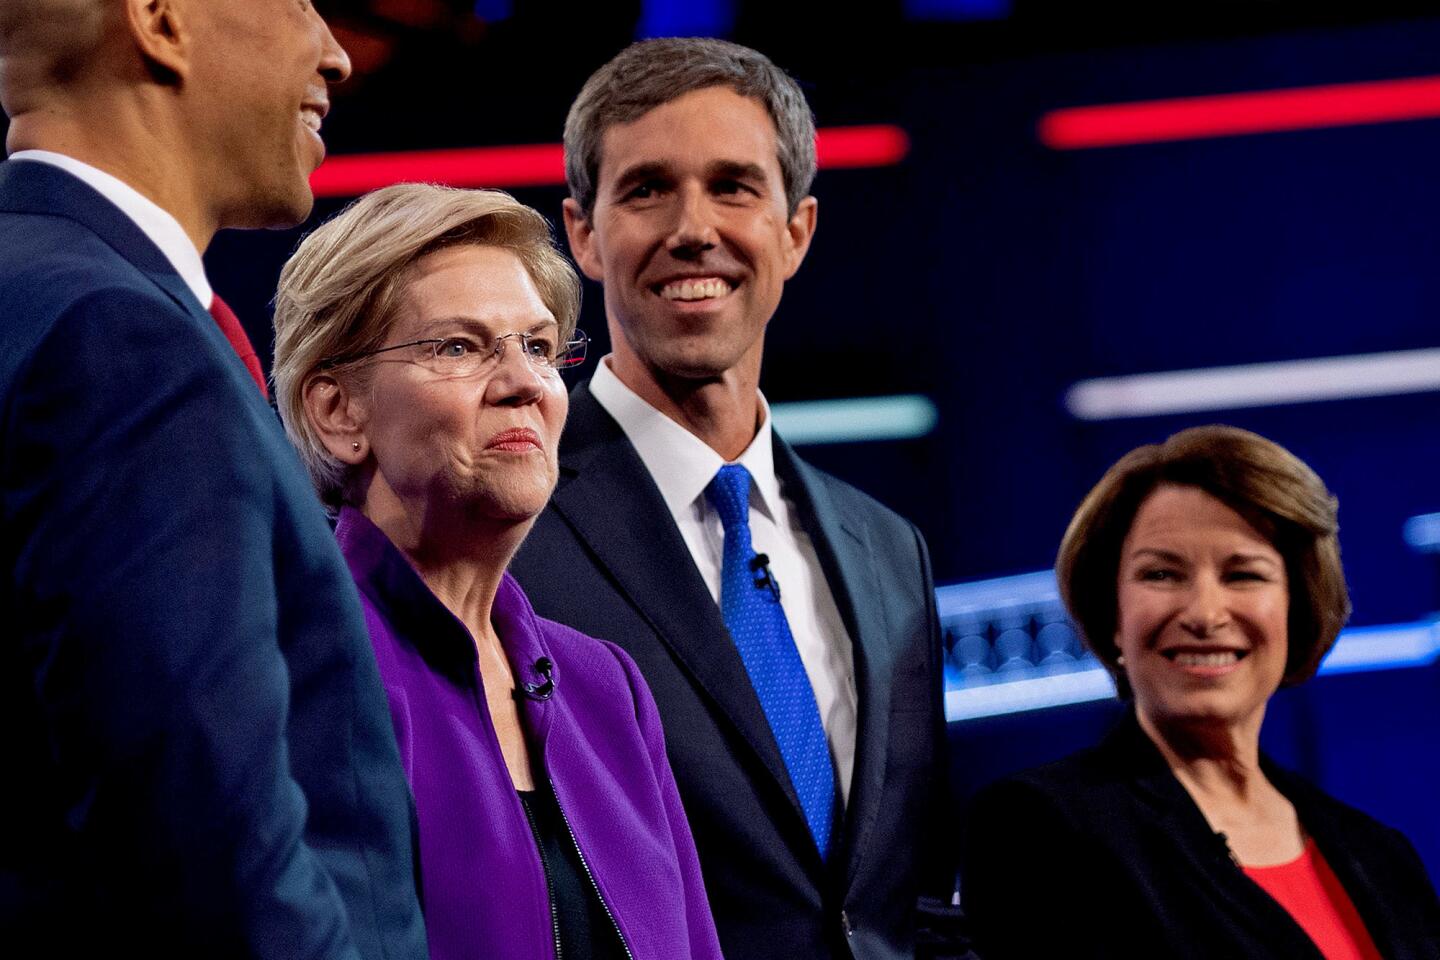 Cory Booker, Elizabeth Warren, Beto O'Rourke and Amy Klobuchar, from left, on the debate stage in Miami.